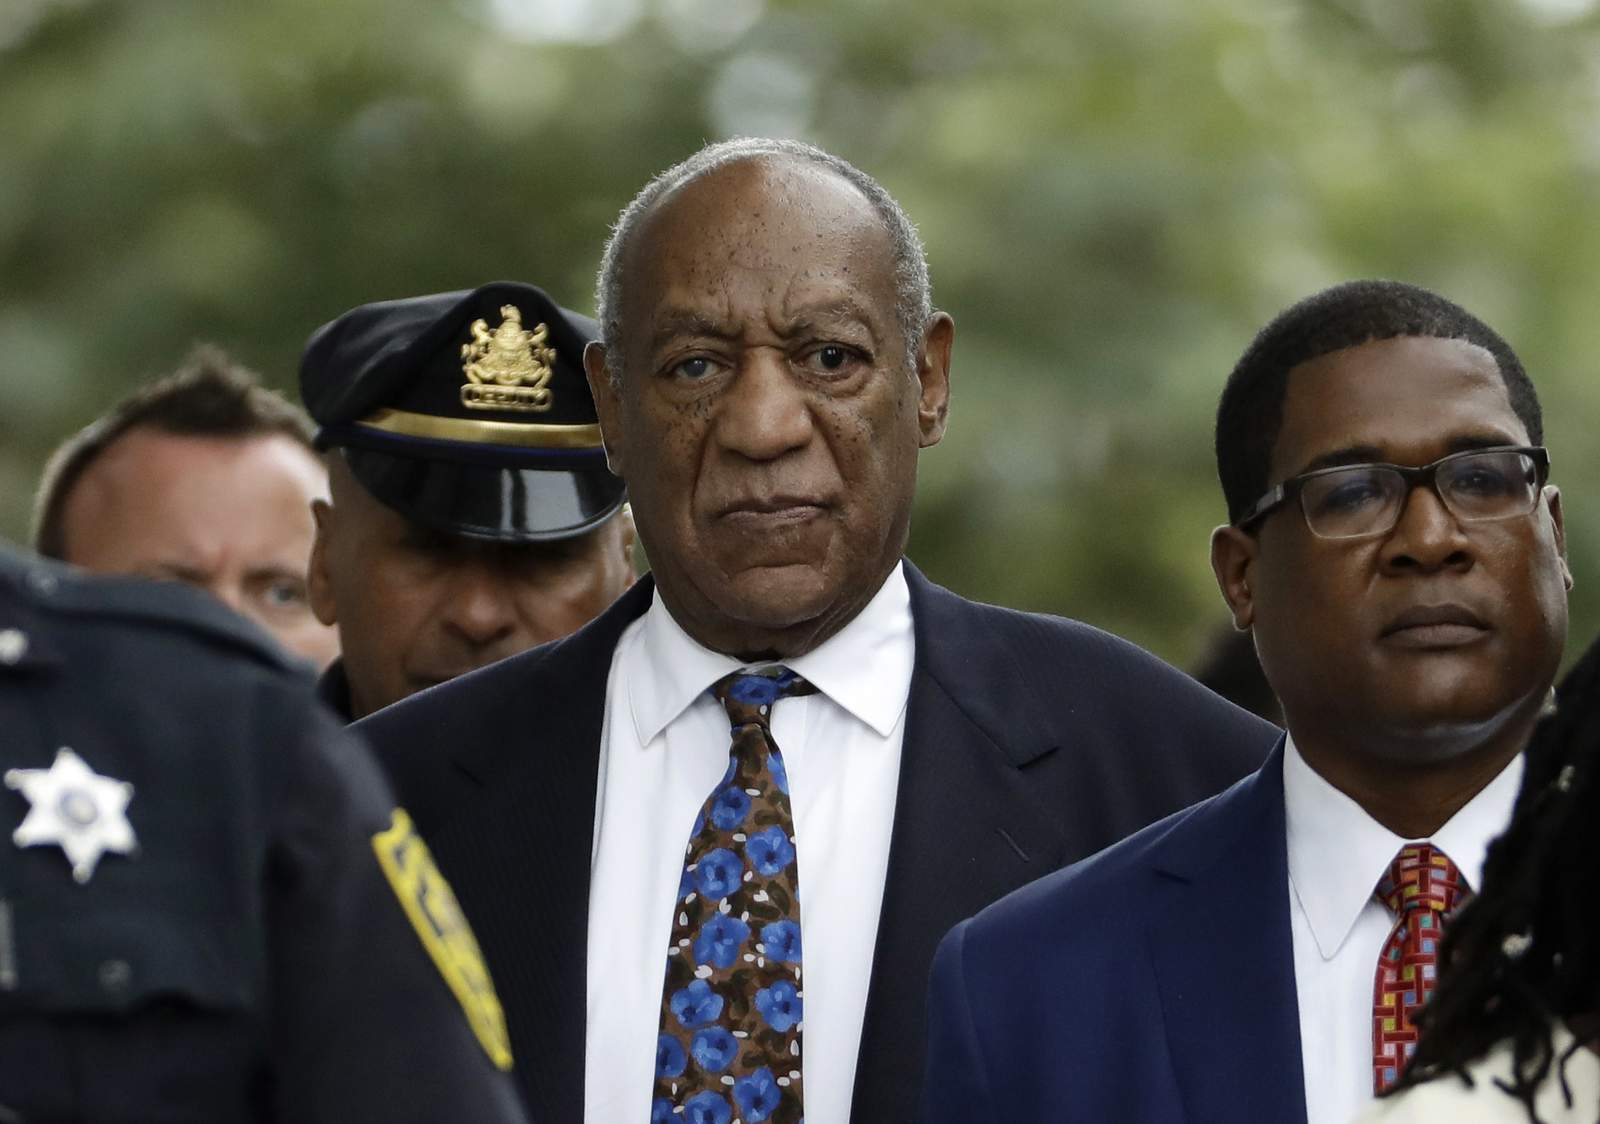 Legal advocates line up on both sides of Bill Cosby's appeal